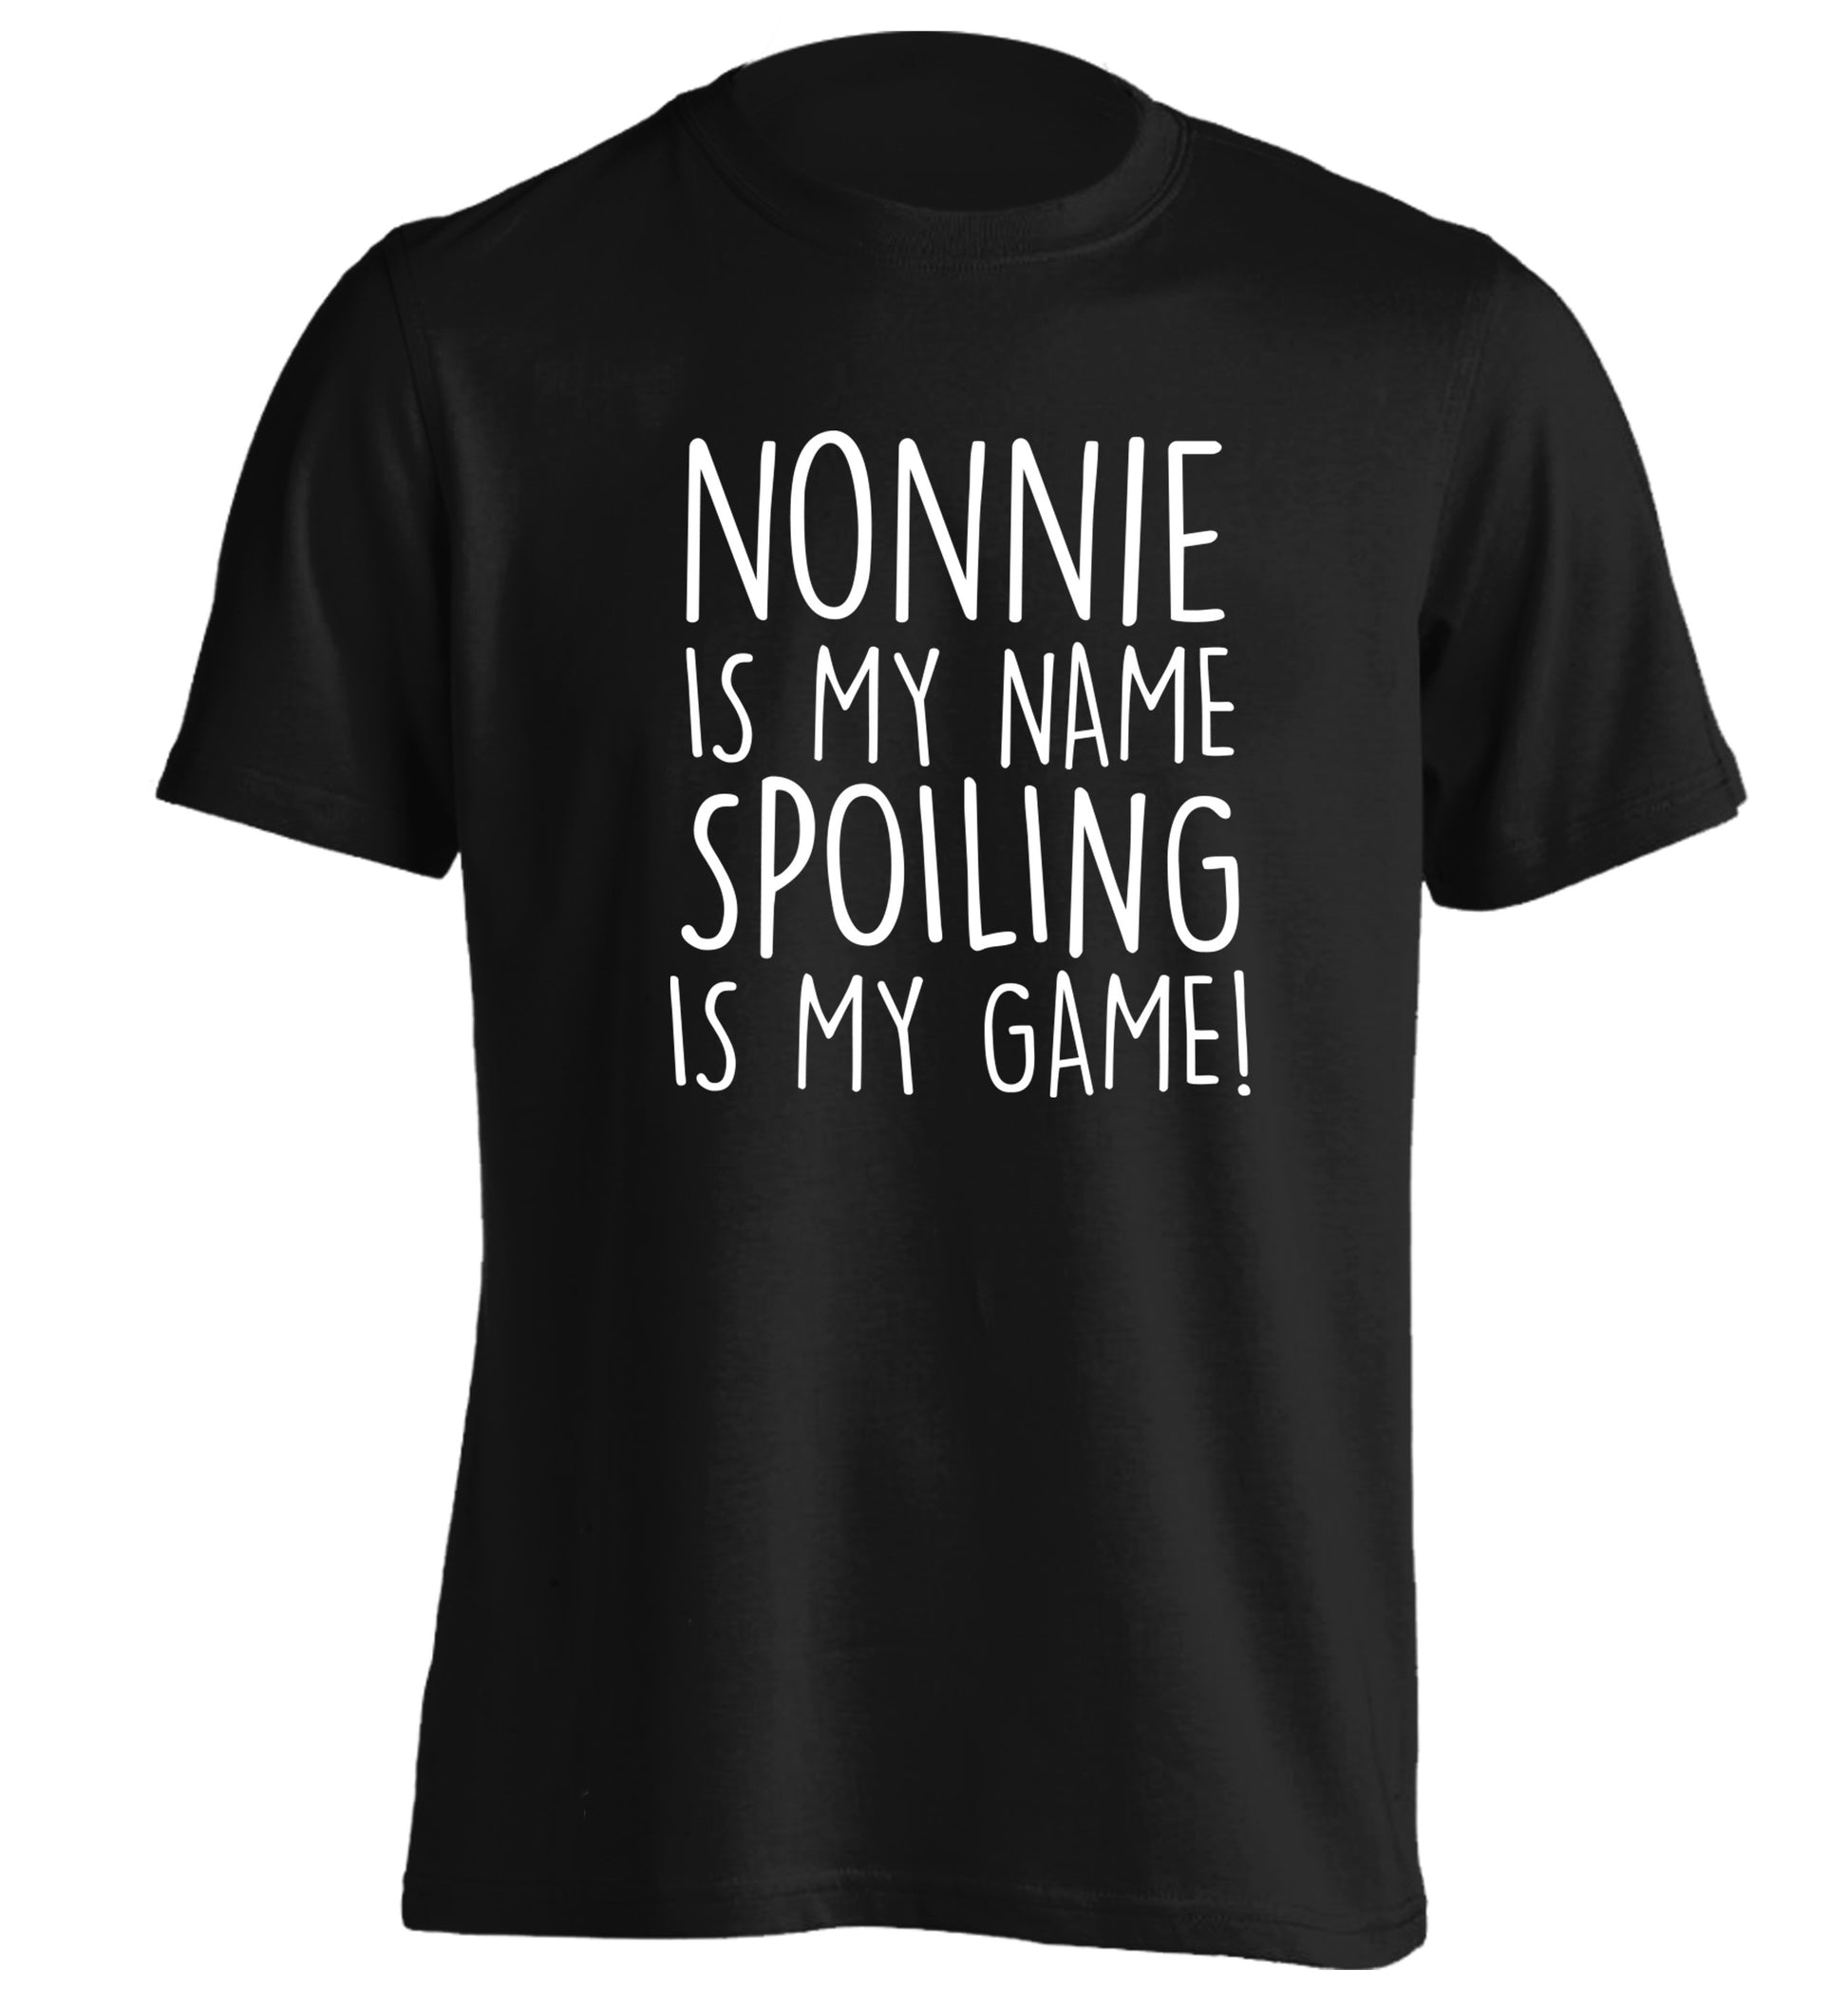 Nonnie is my name, spoiling is my game adults unisex black Tshirt 2XL